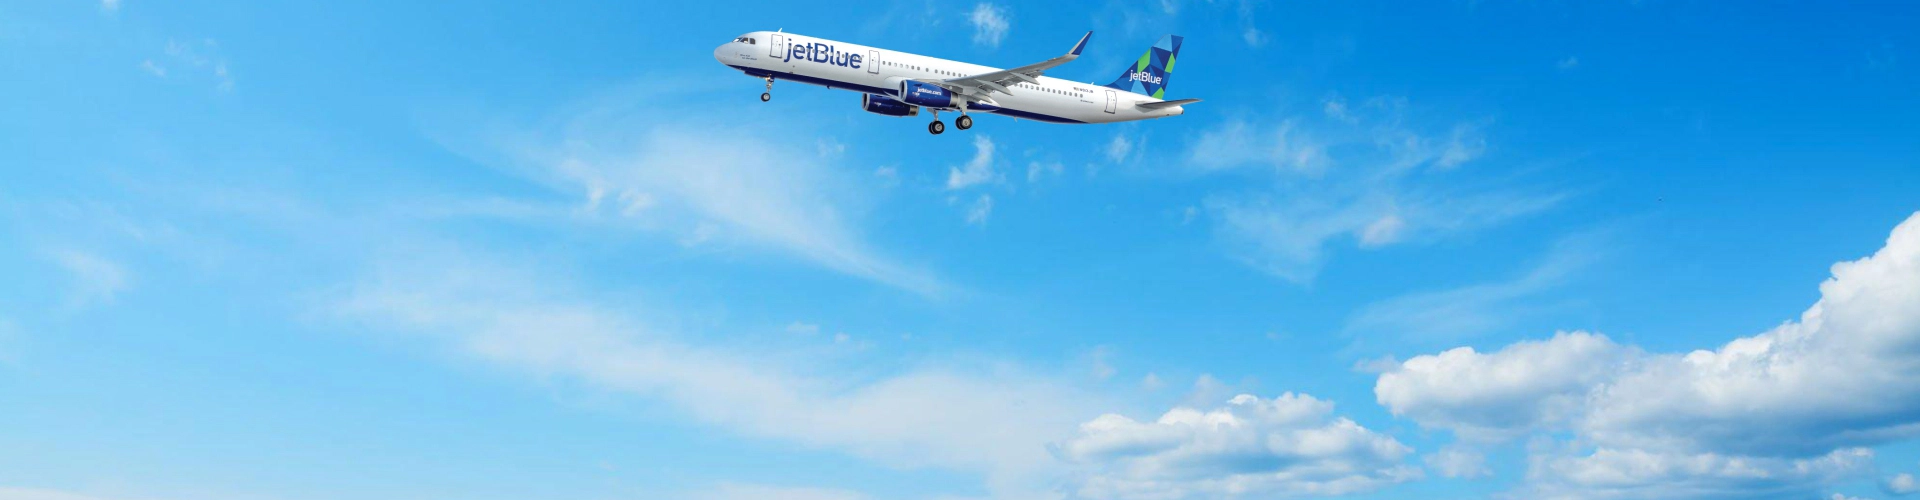 Jetblue airlines